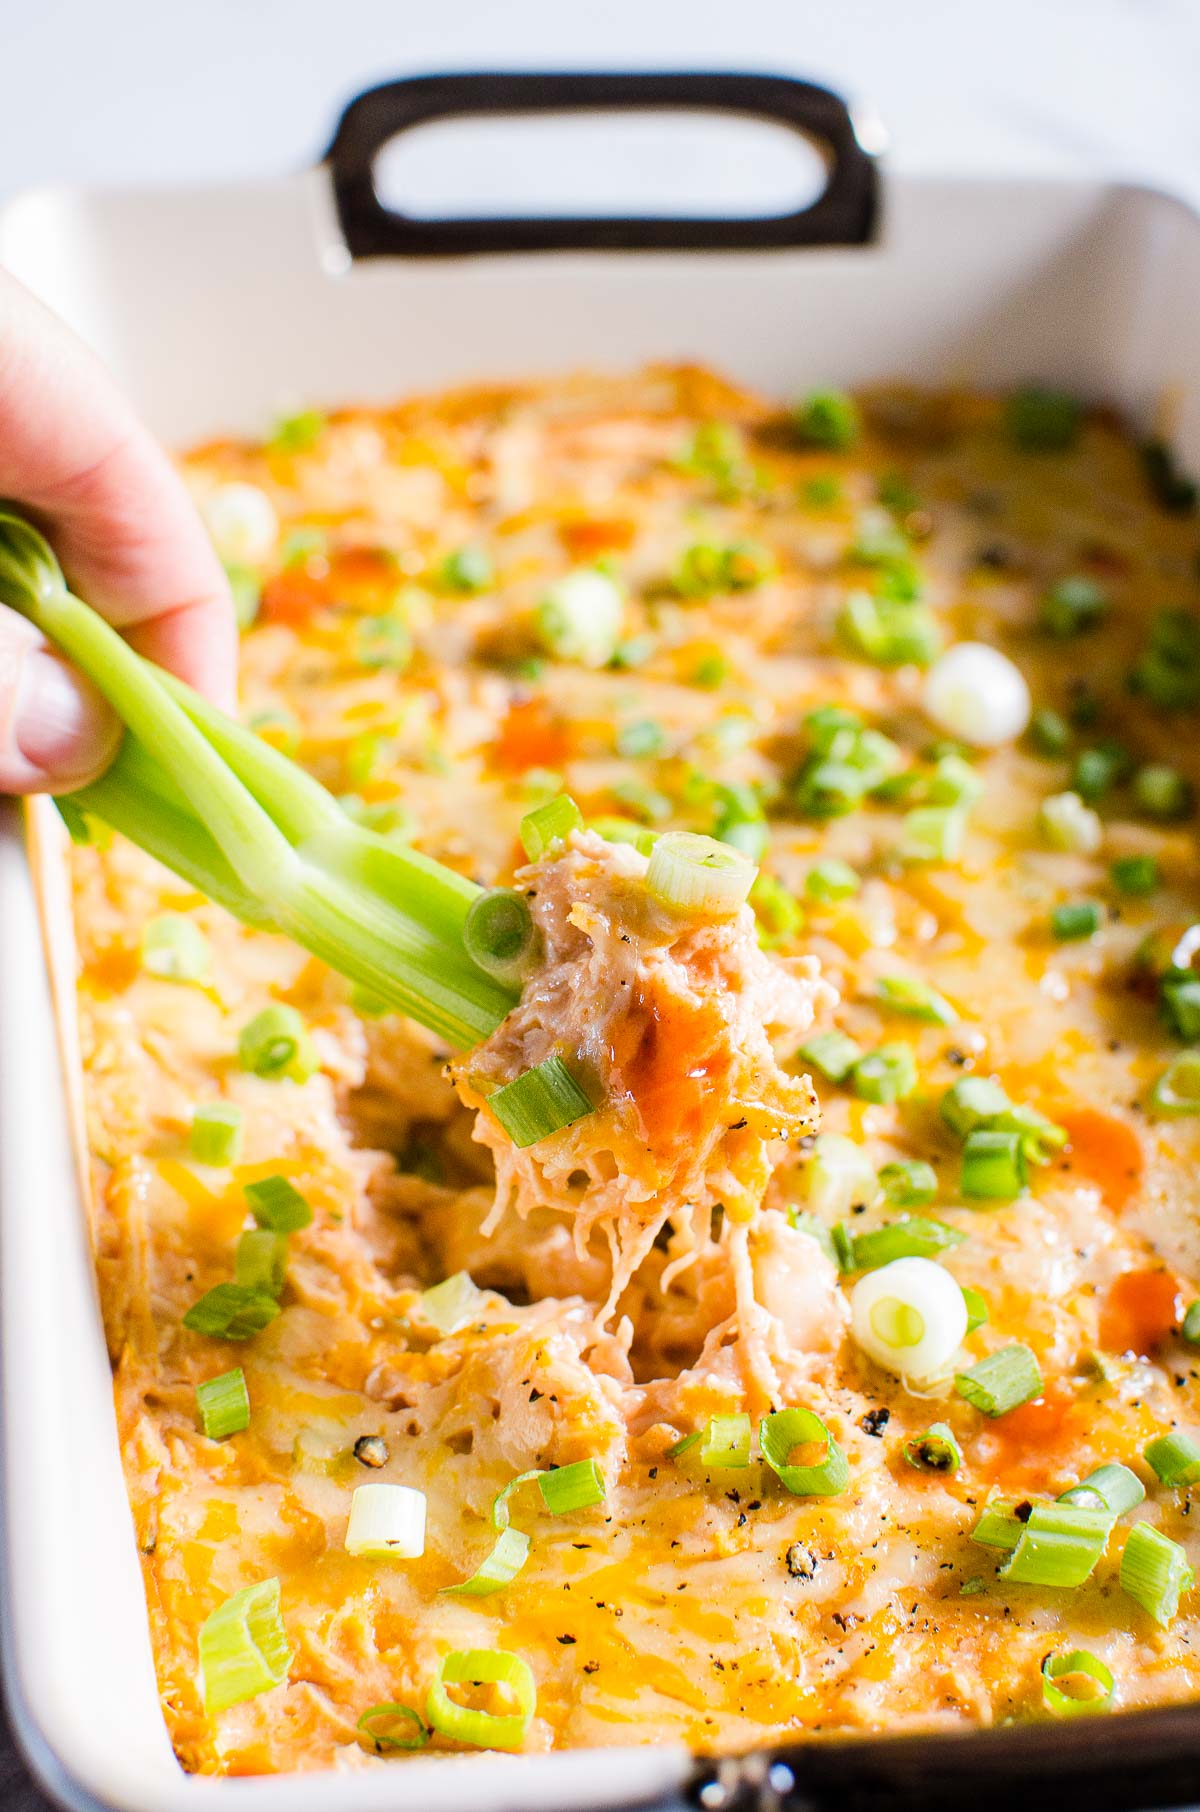 Healthy buffalo chicken dip in a dish with celery stick being dipped into it.